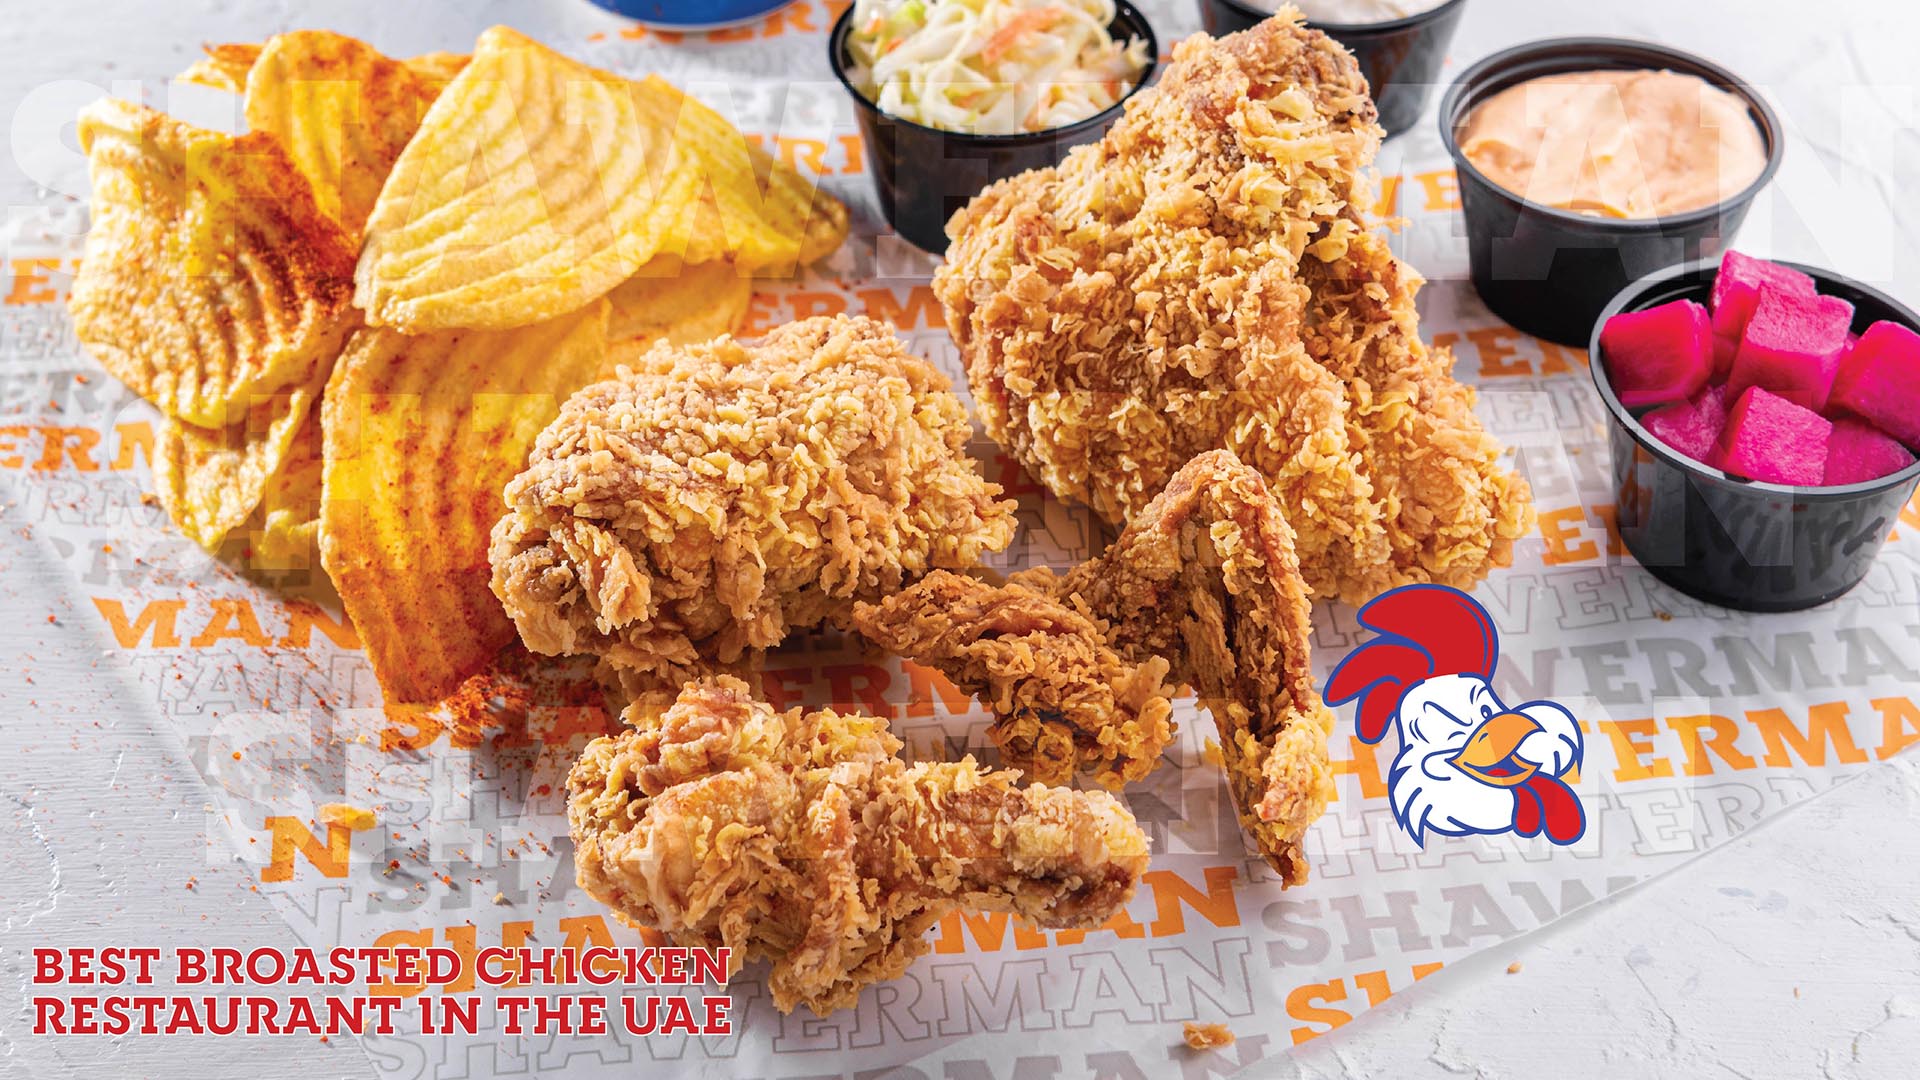 Get Ready for the Perfect Bite: Enjoy Deliciously Crispy & Juicy Broasted Chicken